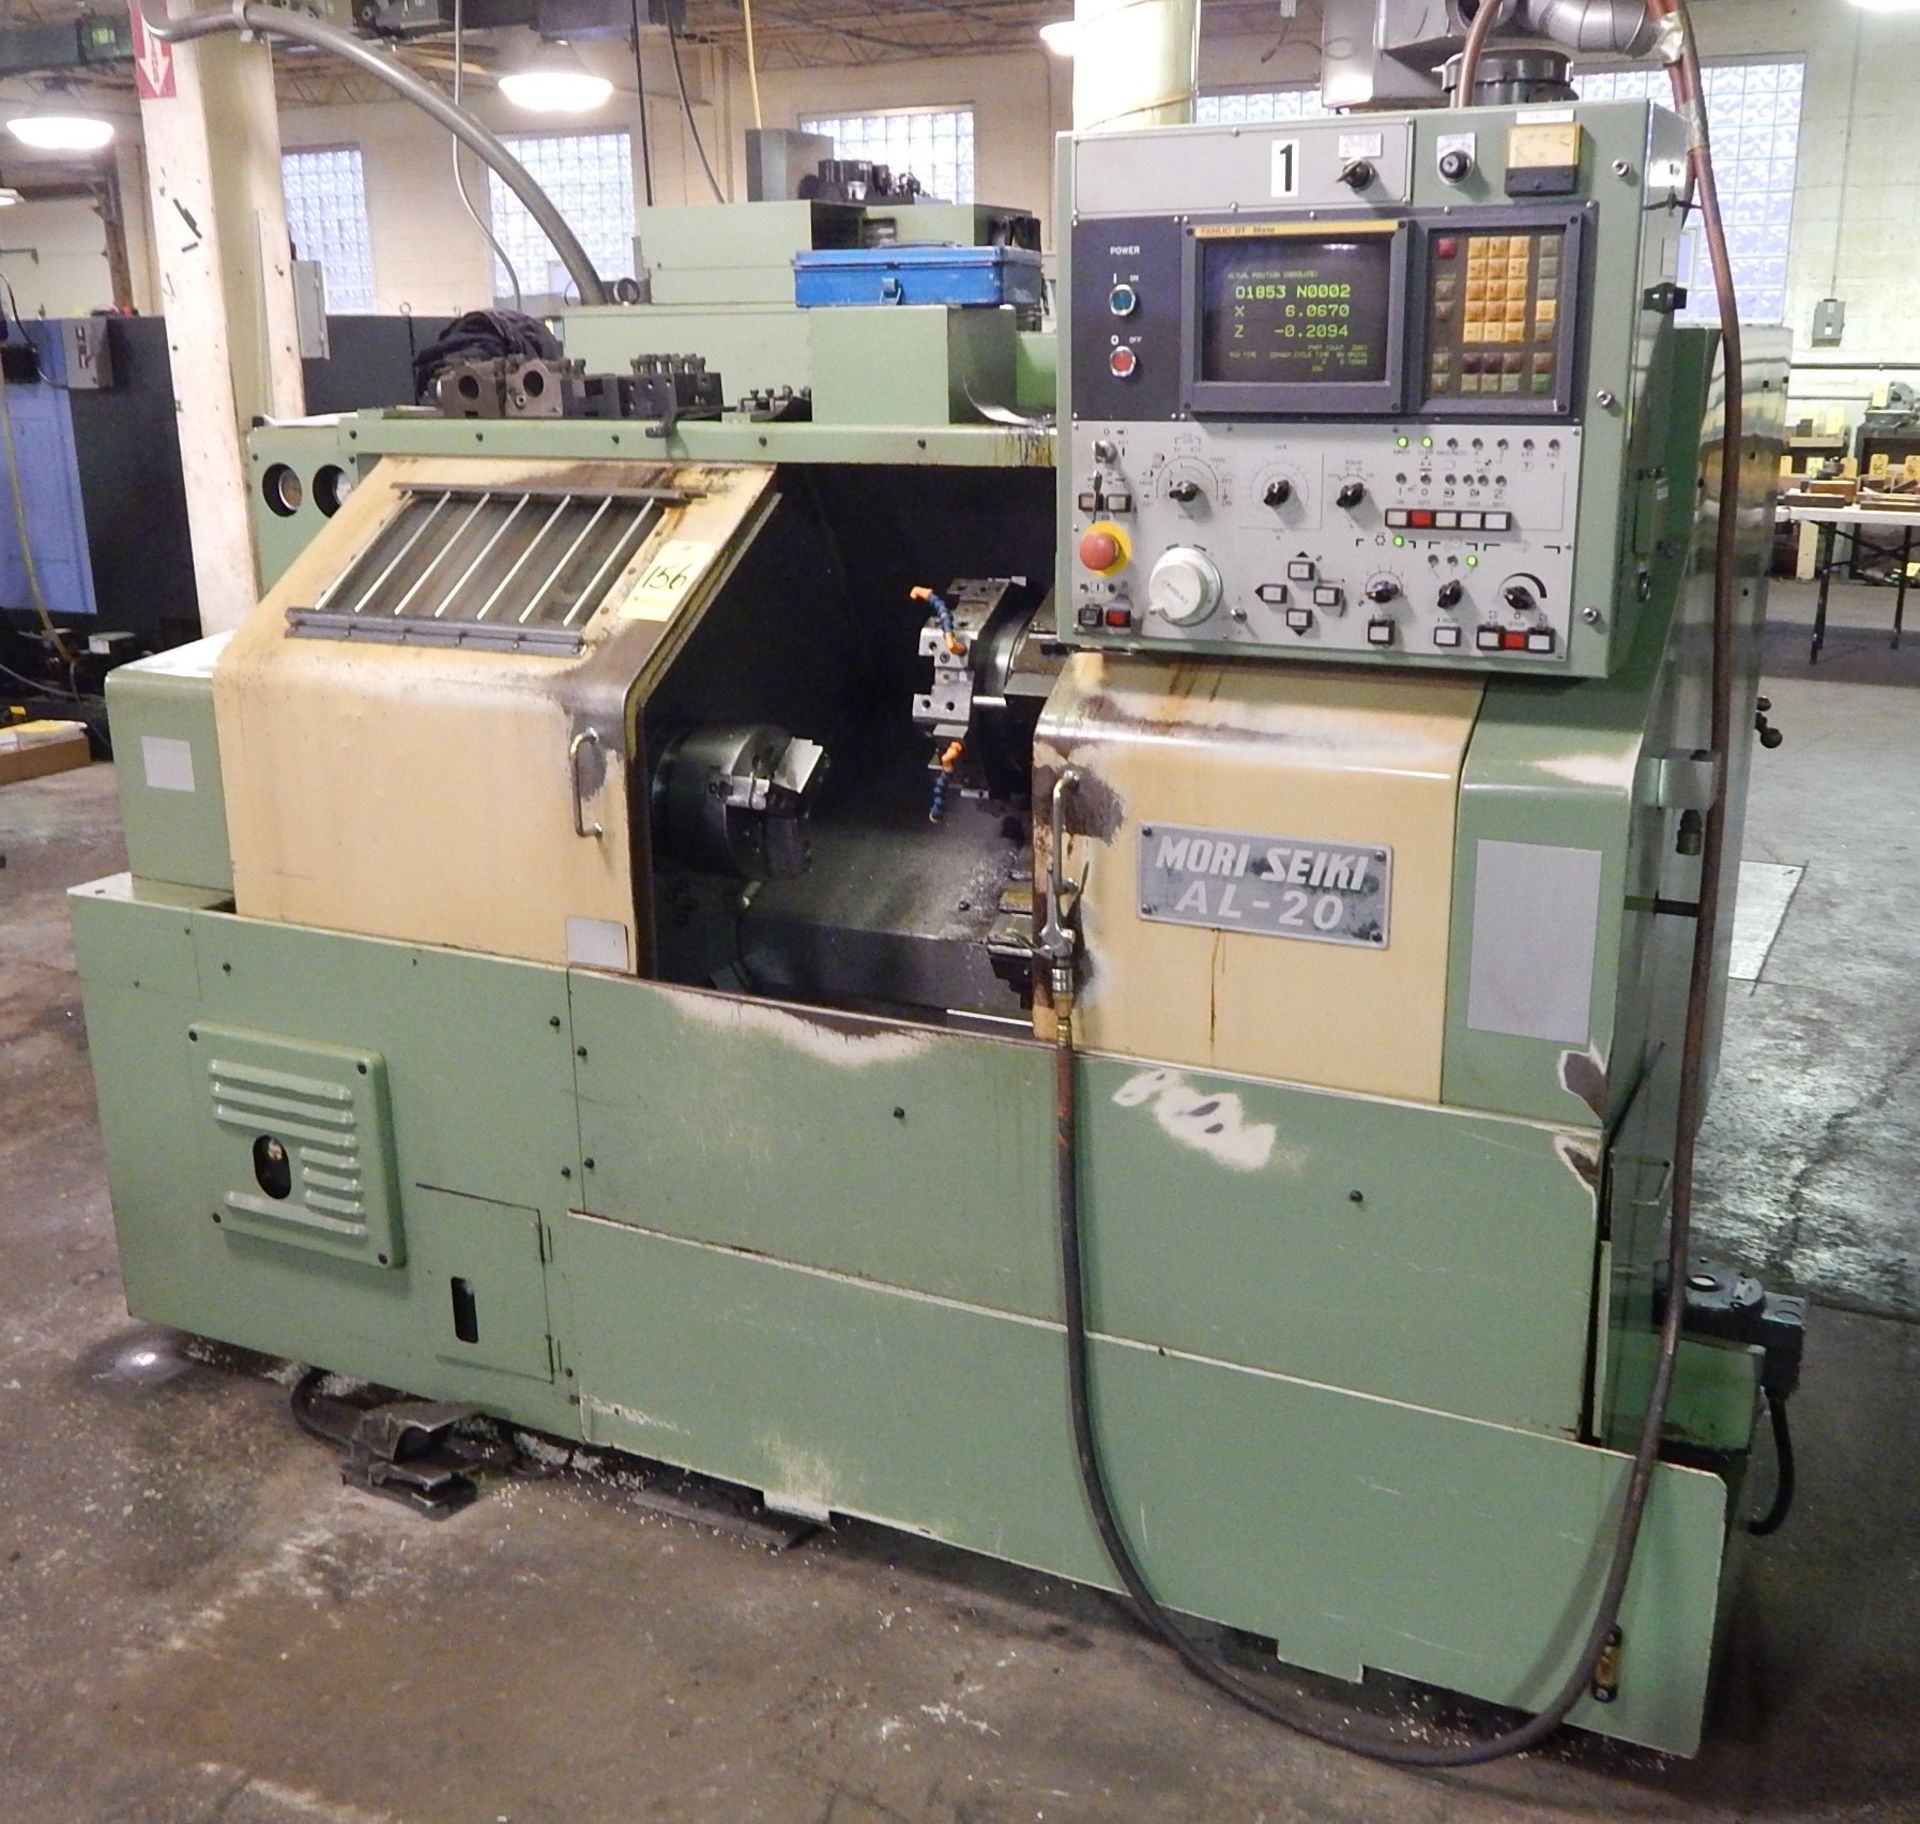 Mori-Seiki AL-20, CNC Turning Center, s/n 2796, 8 In. 3-Jaw Chuck, 8 Station Turret, Tailstock, - Image 3 of 12